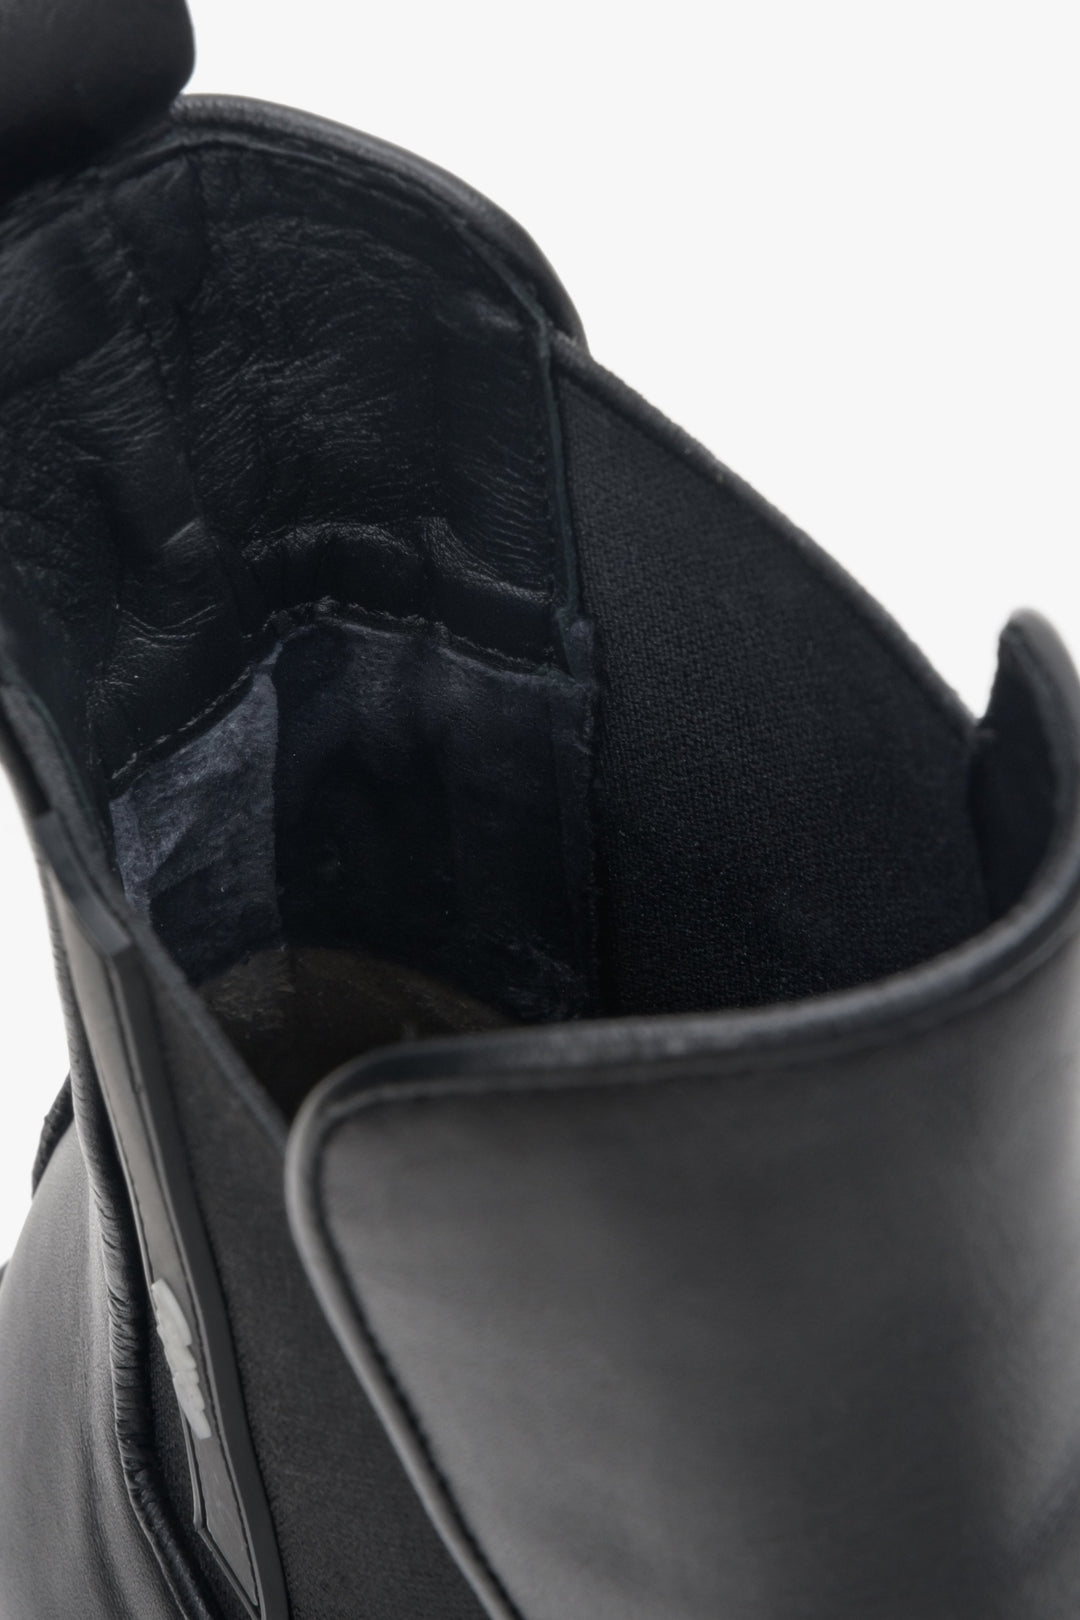 Women's black leather  ankle boots by Estro - close-up to the inside of the model.